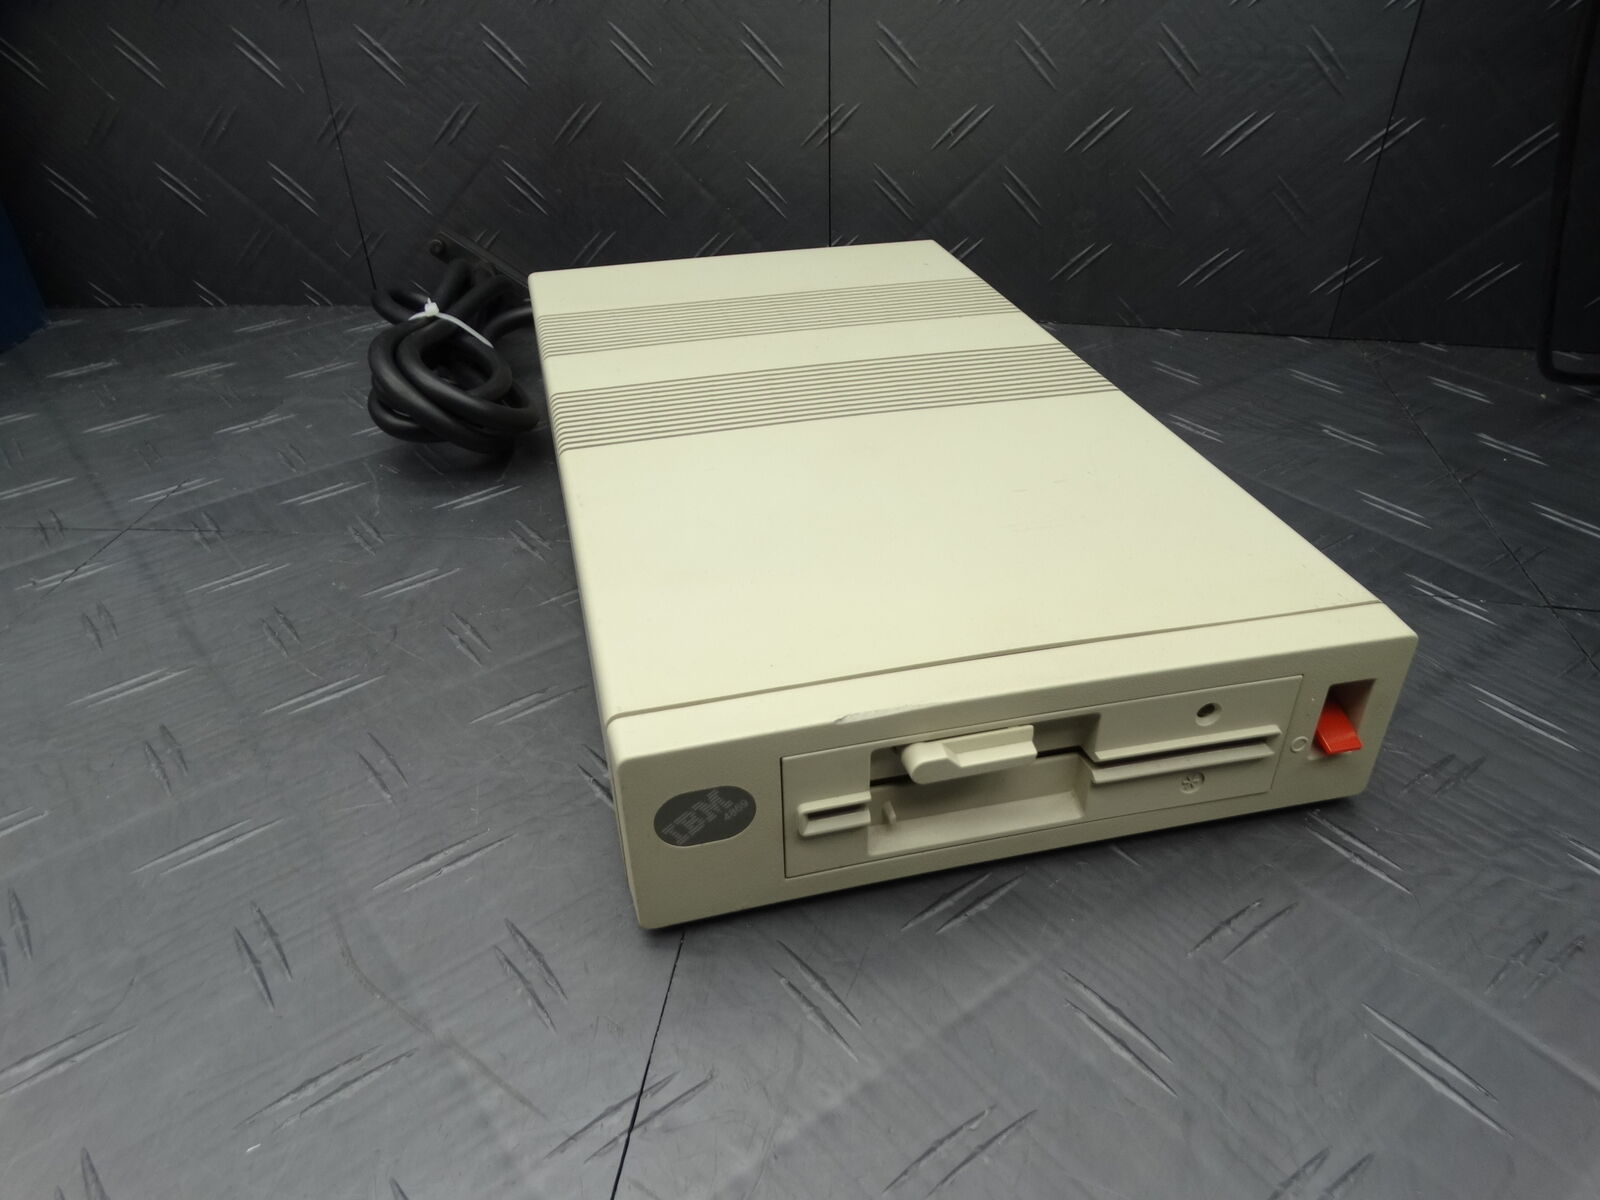 IBM Type 4869 External 5 1/4in Floppy Disk Drive Mainframe Collection